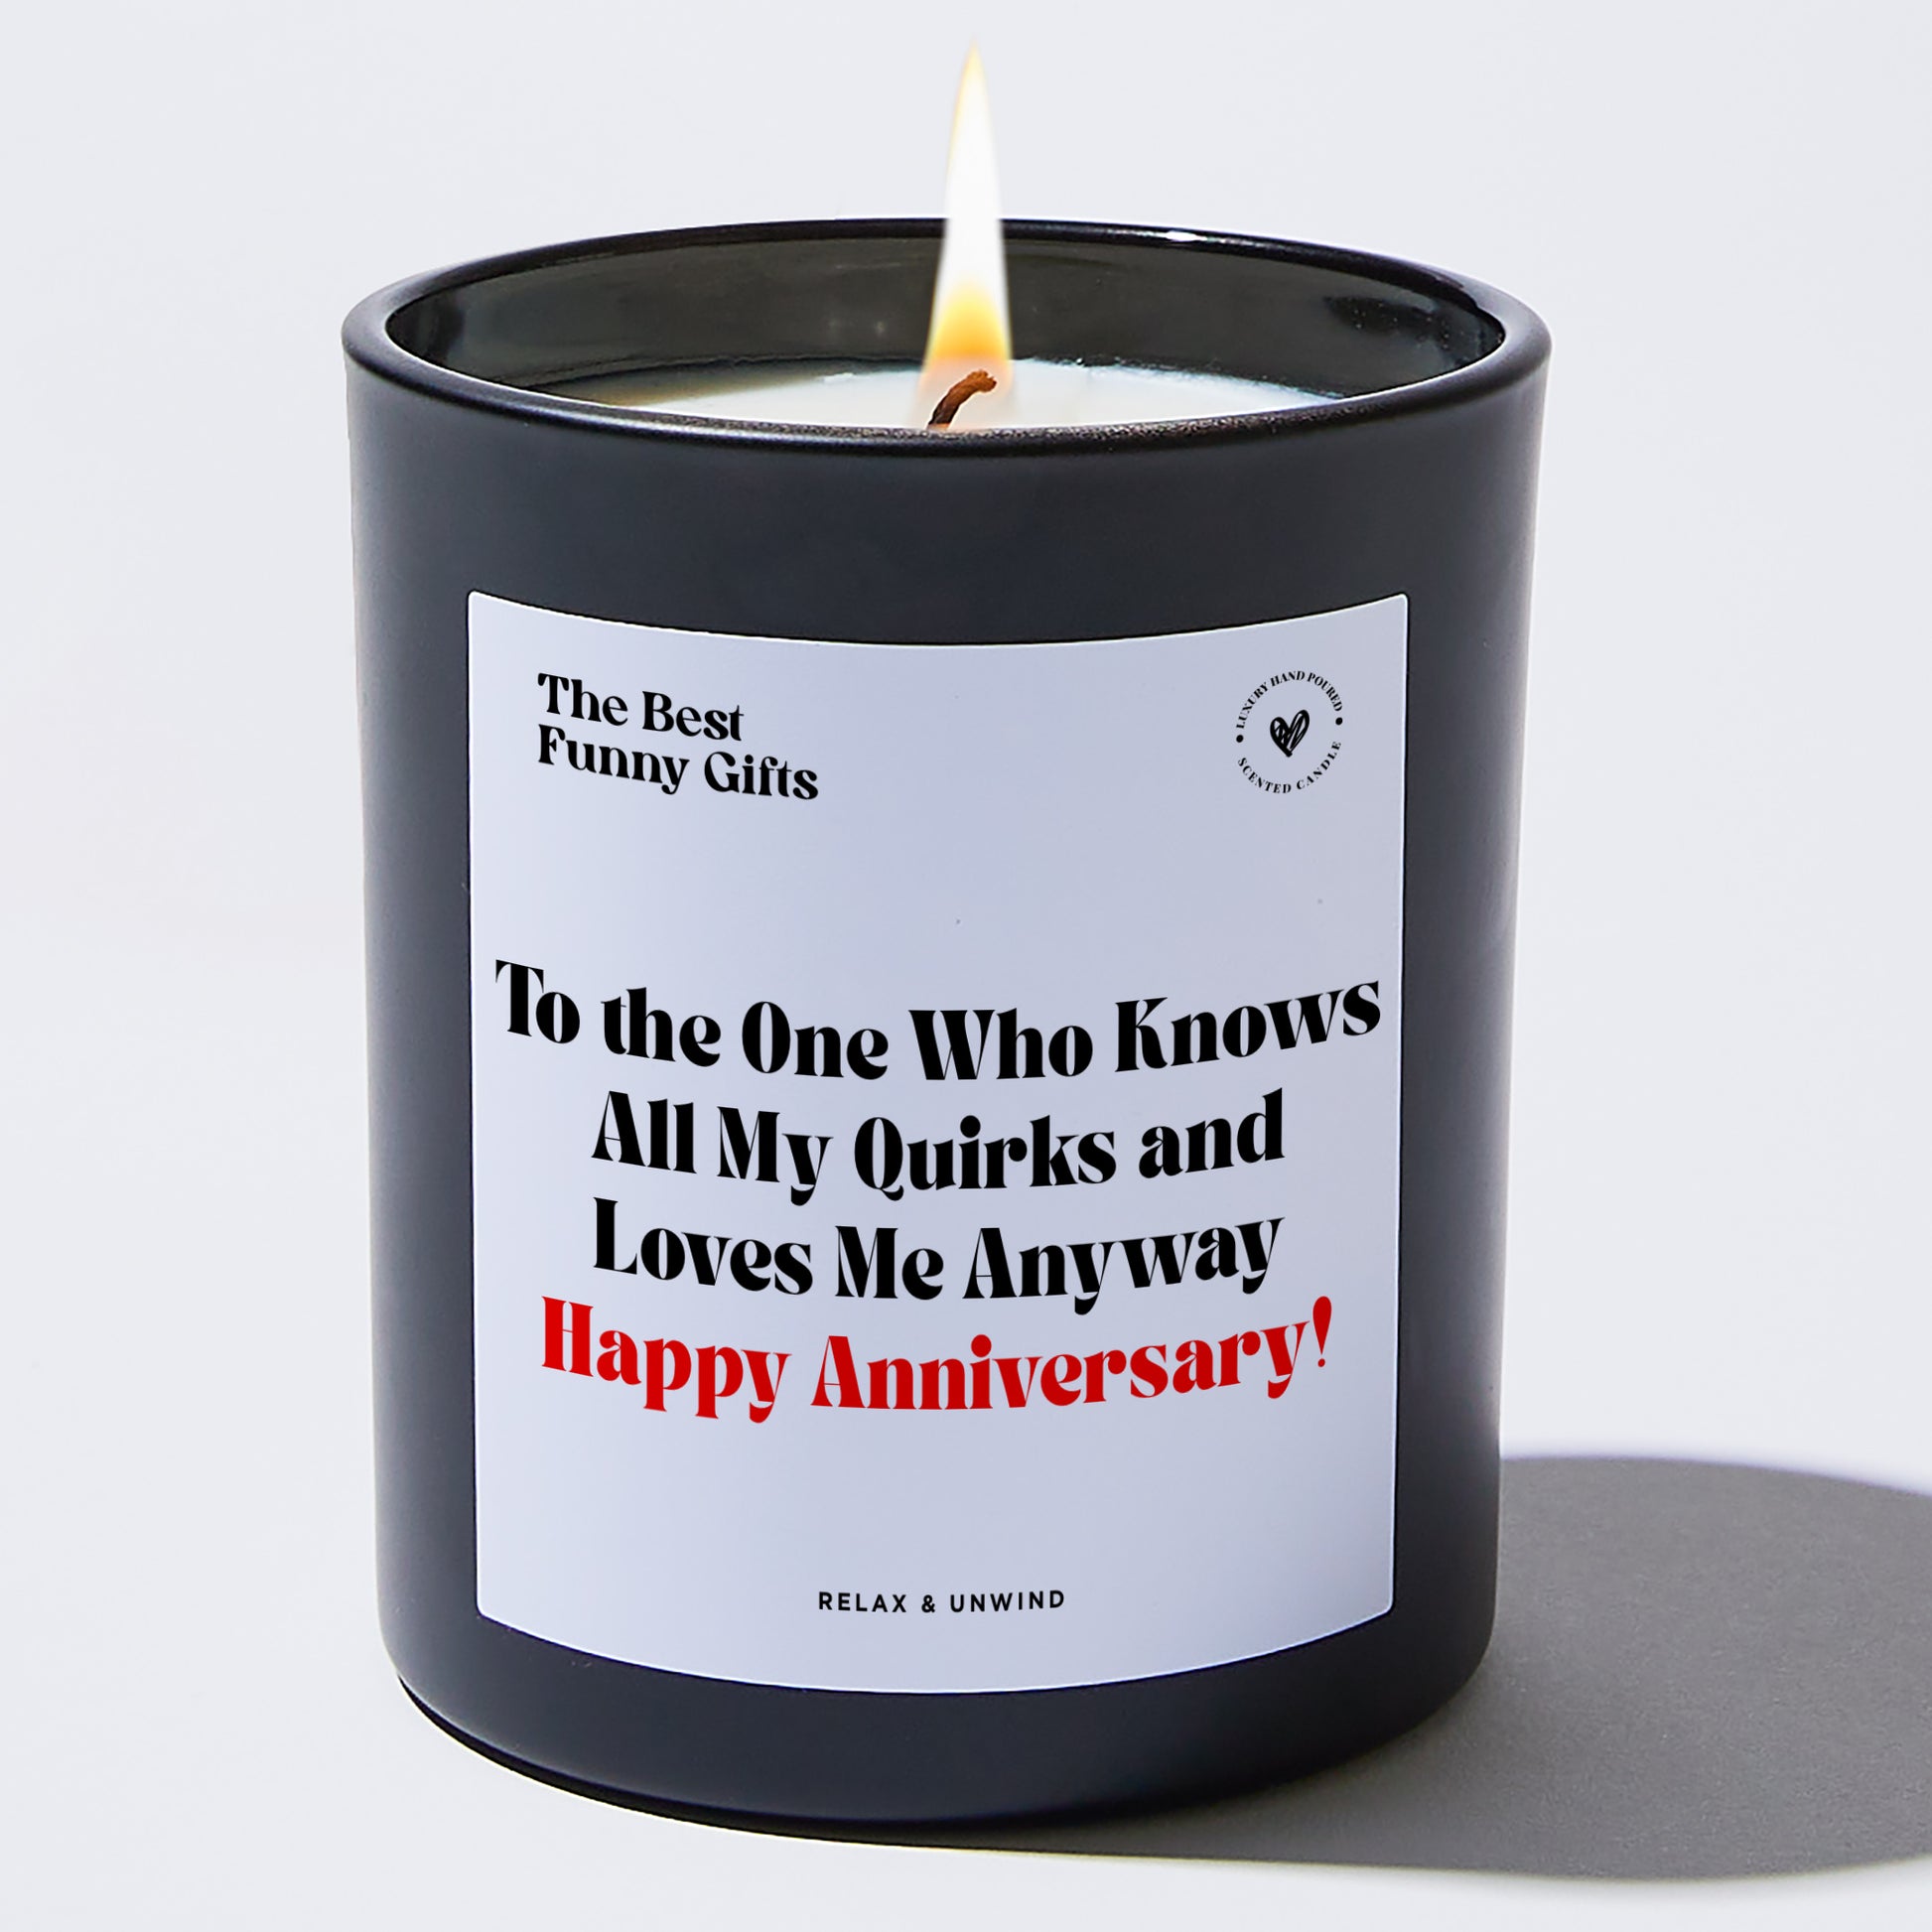 Anniversary To the One Who Knows All My Quirks and Loves Me Anyway – Happy Anniversary! - The Best Funny Gifts